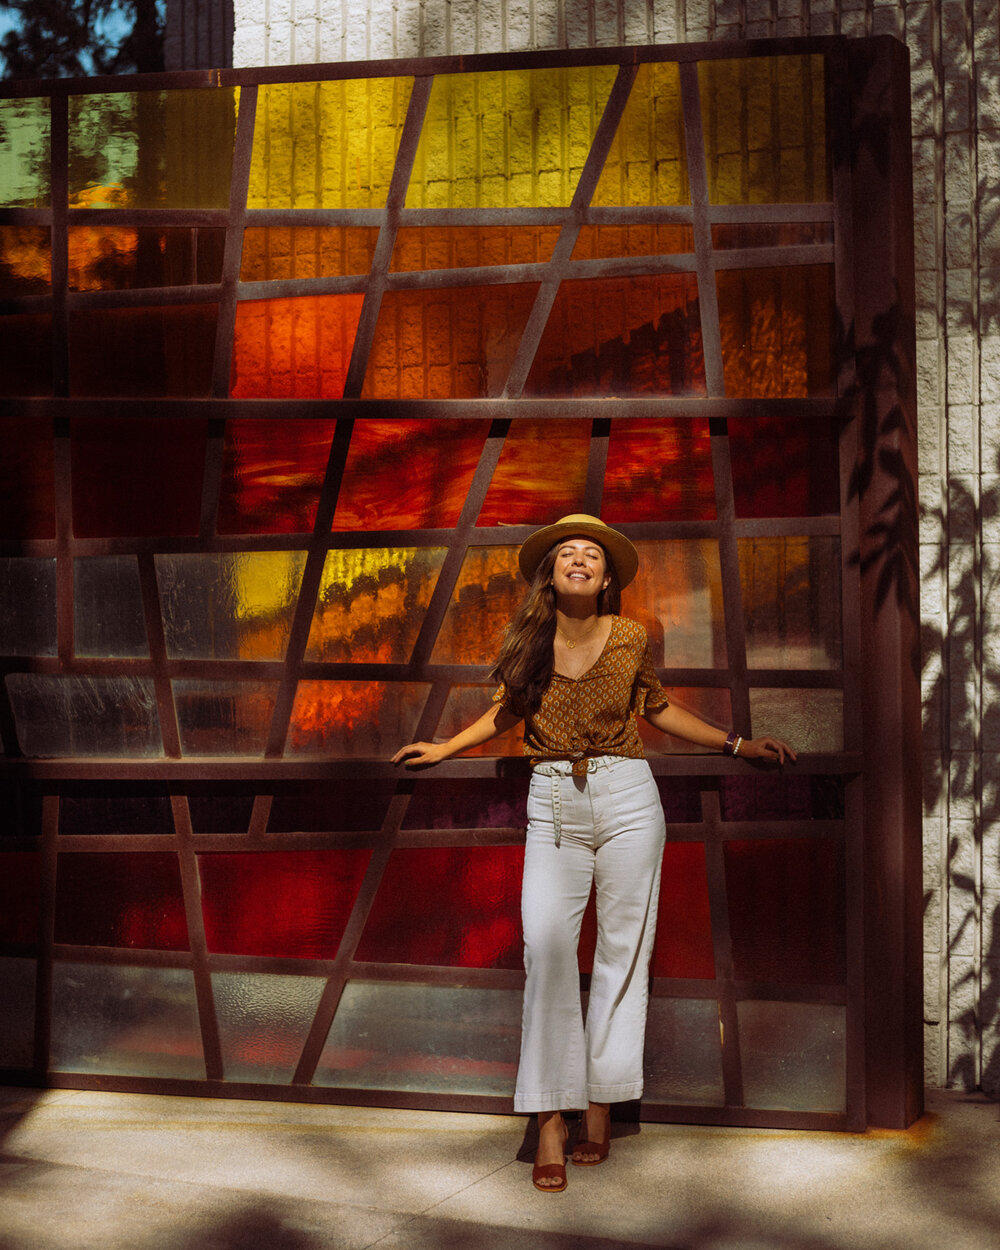 Rachel Off Duty: A Woman Smiling in Front of a Red, Orange, and Yellow Glass Art Piece